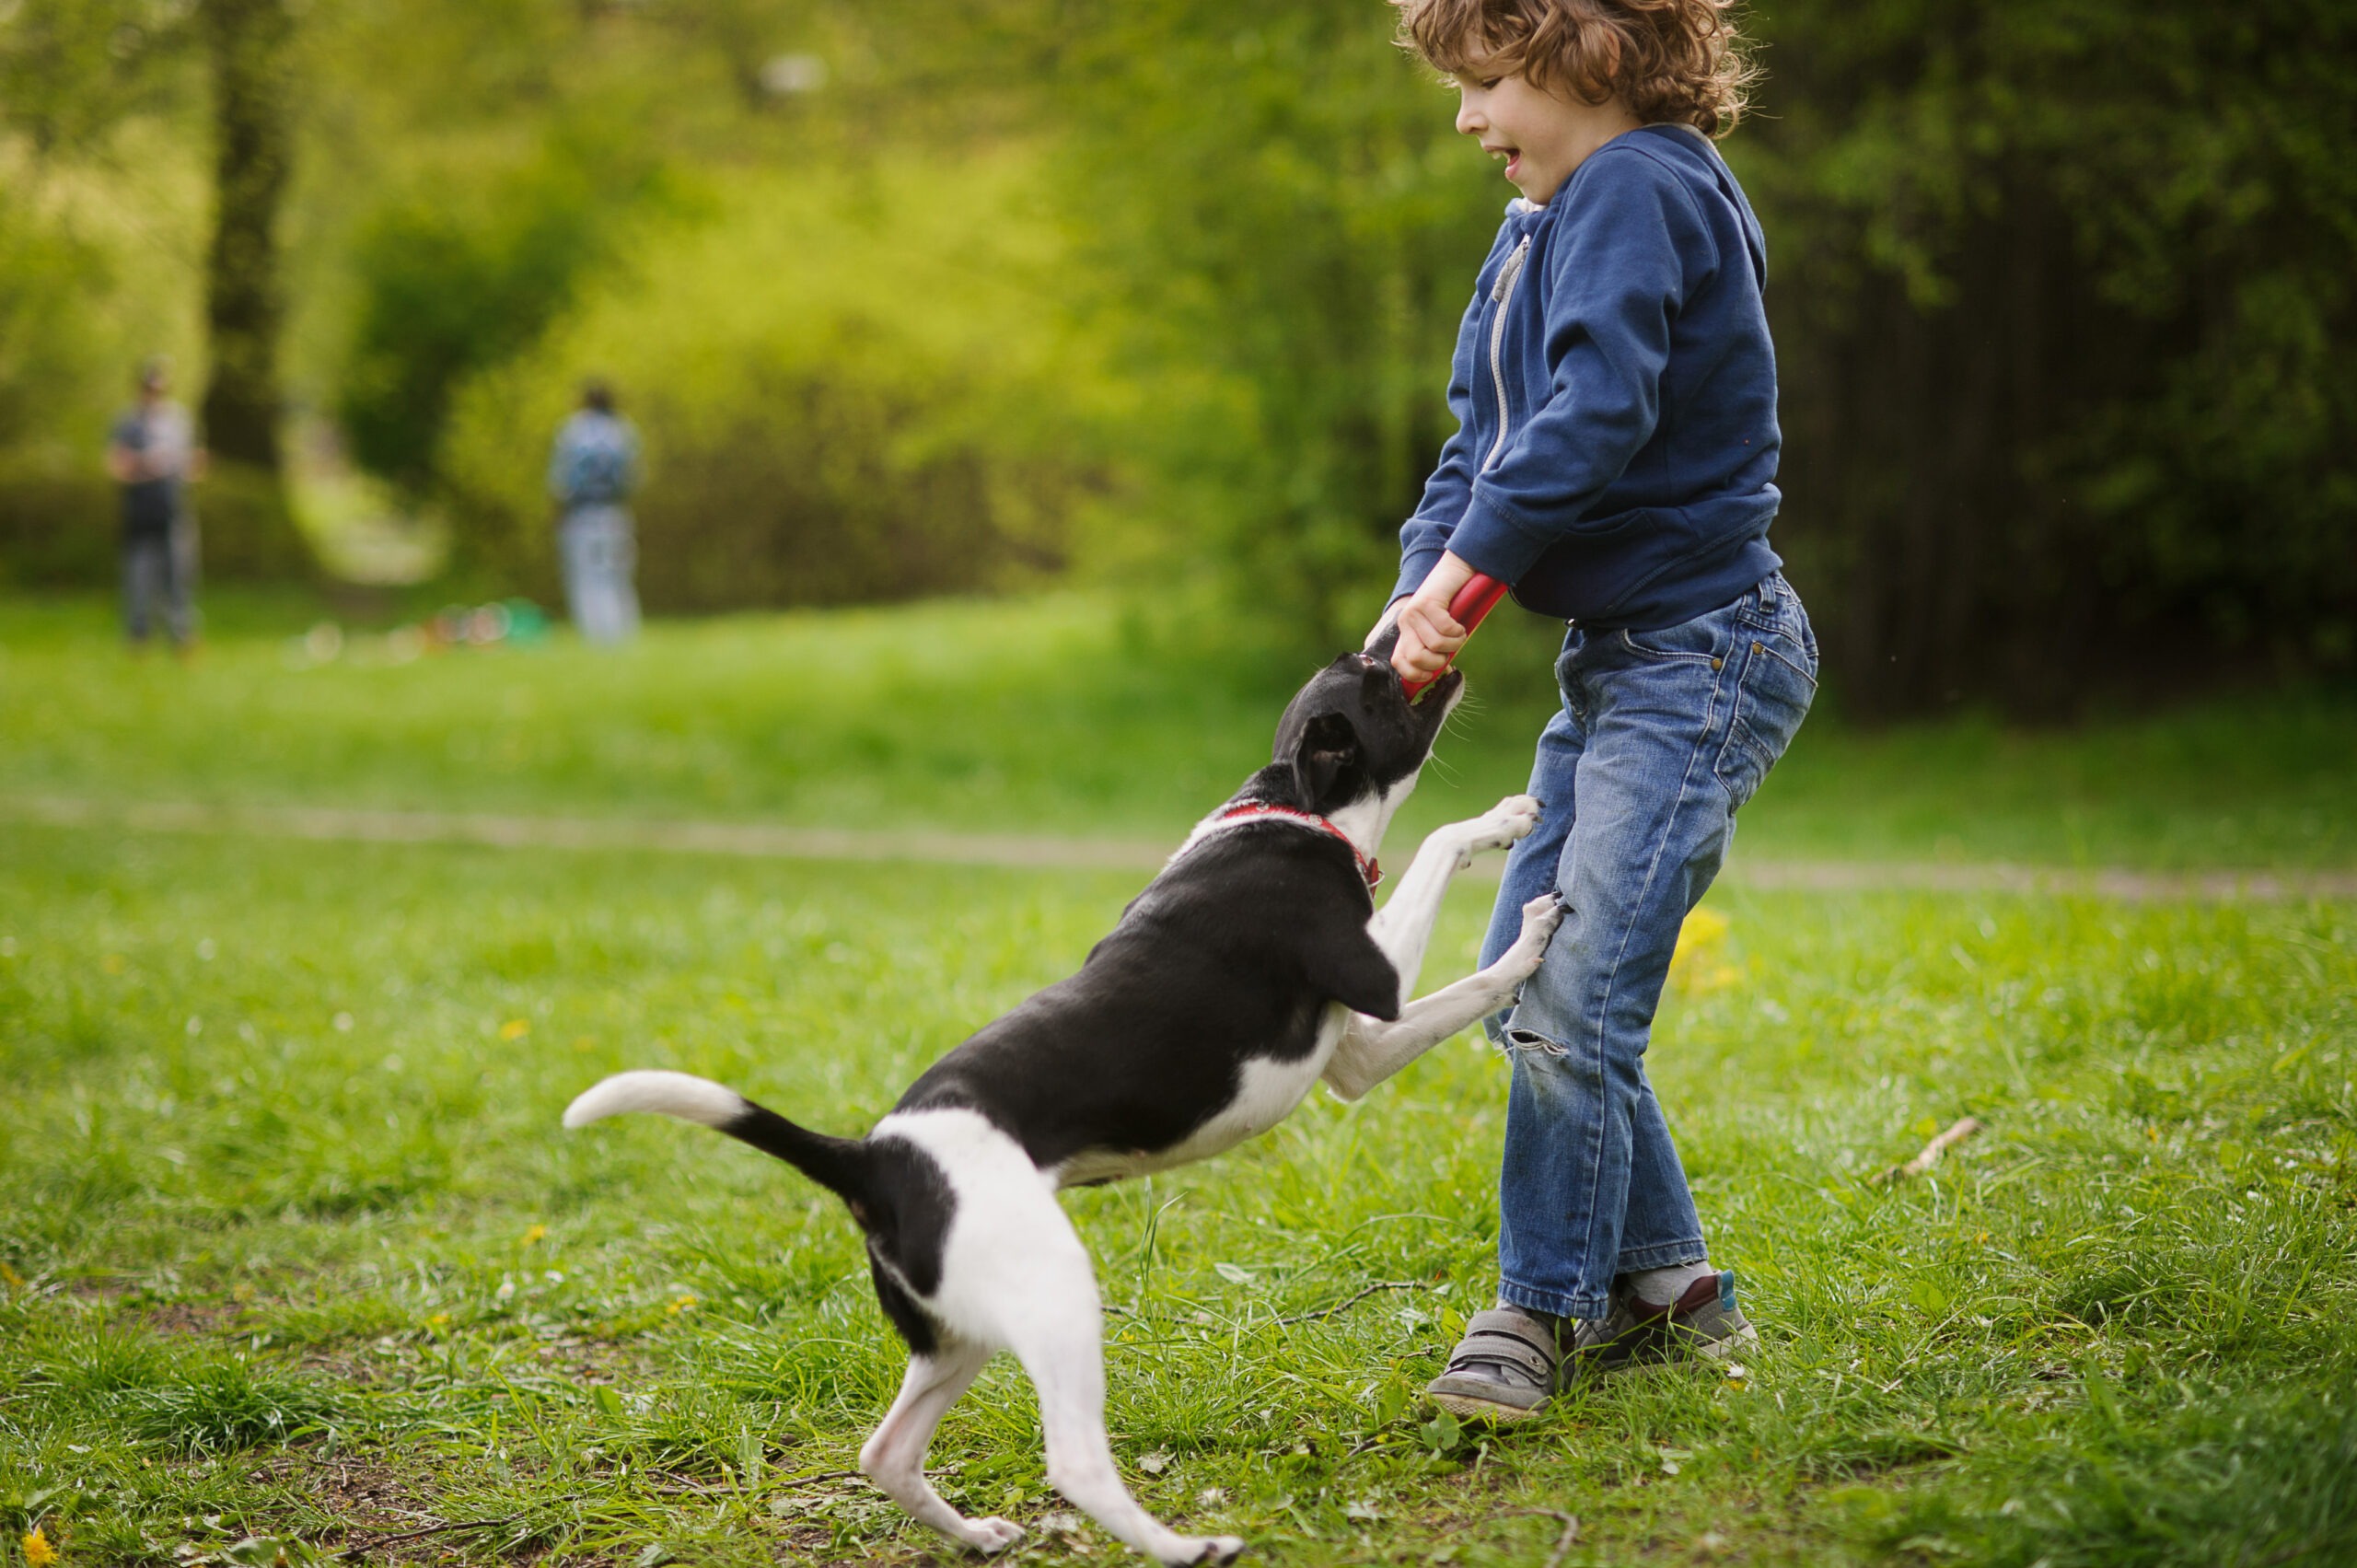 Children, Dog Bites and How They Can Be Prevented